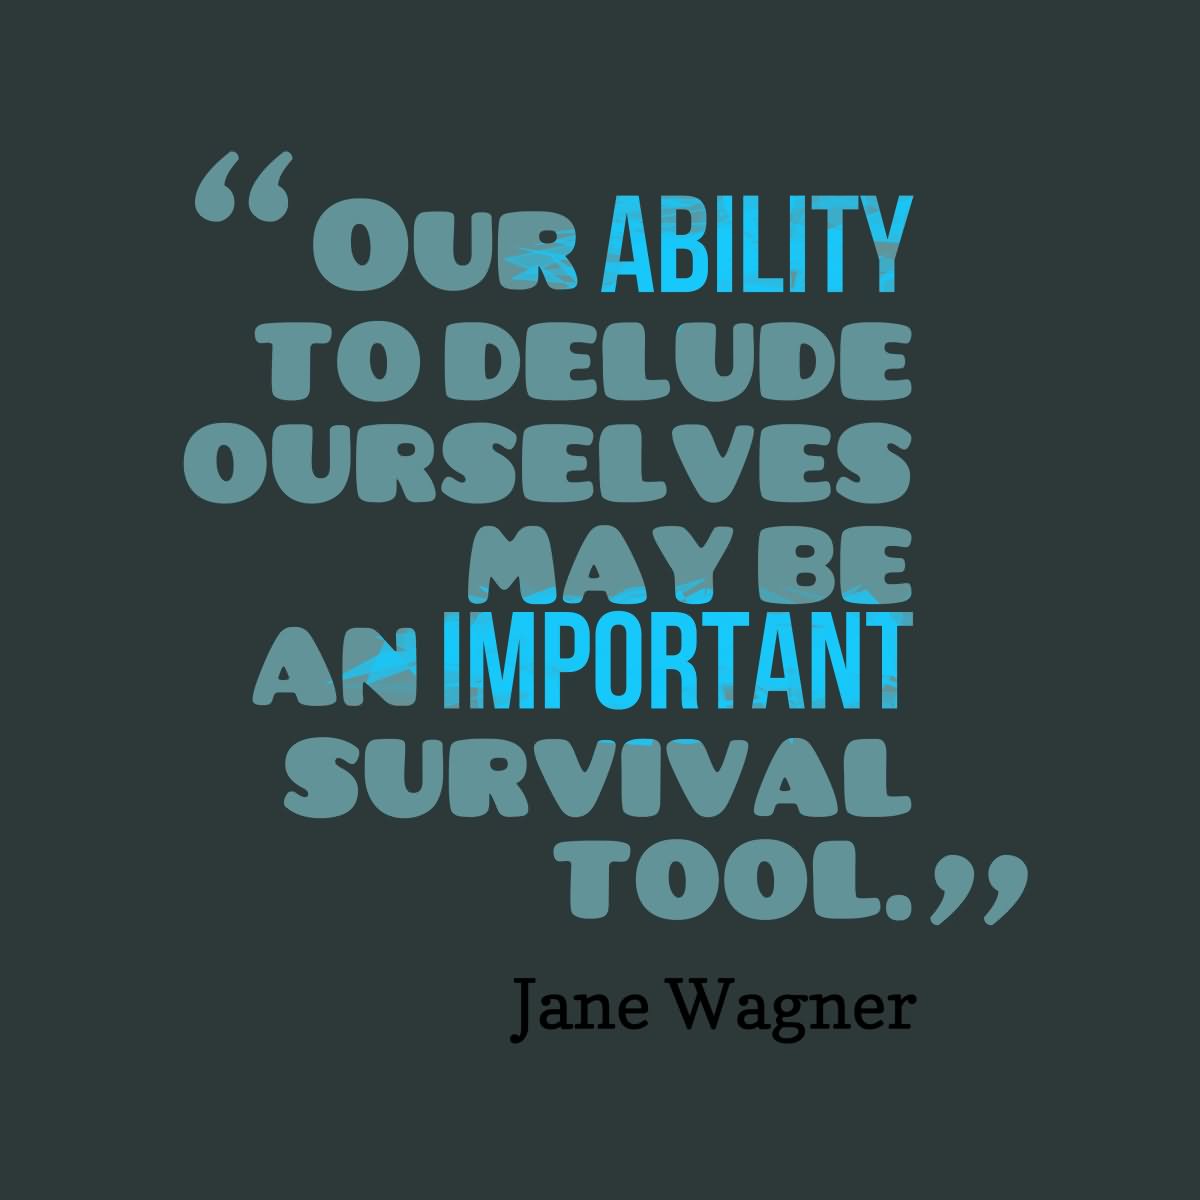 Our ability to delude ourselves may be an important survival tool   - Jane Wagner